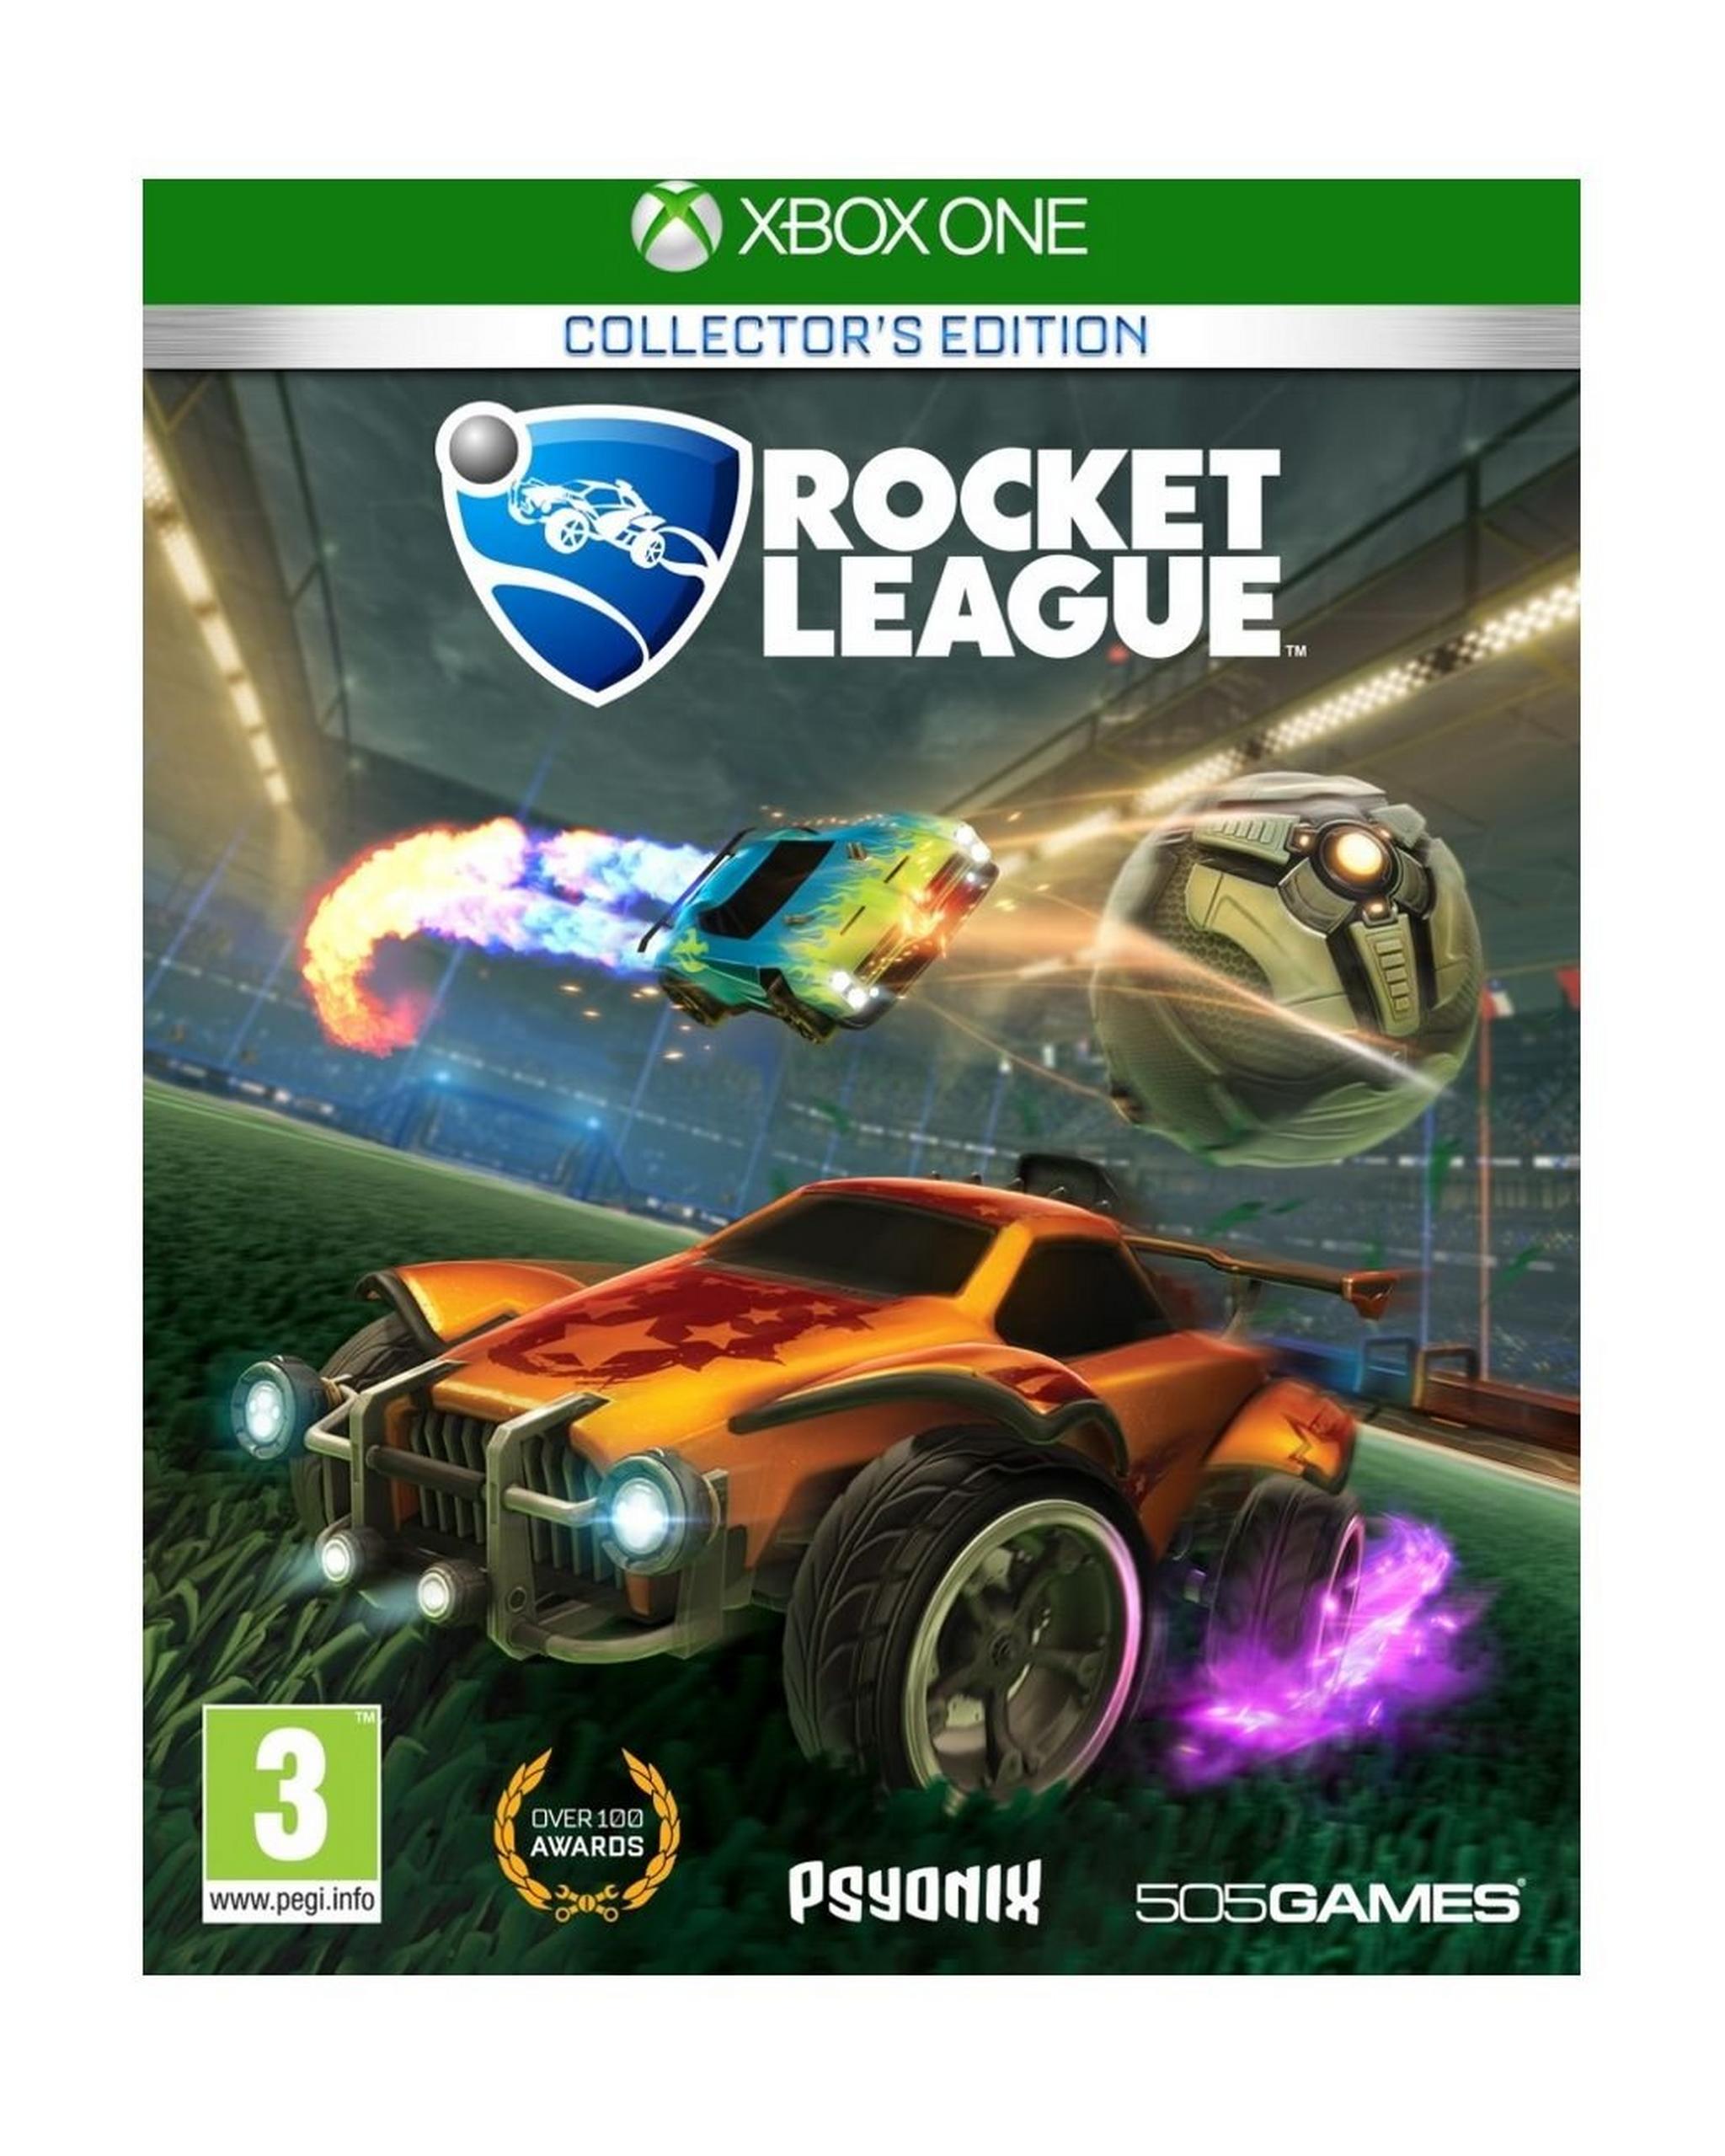 Rocket League Collector’s Edition – Xbox One Game